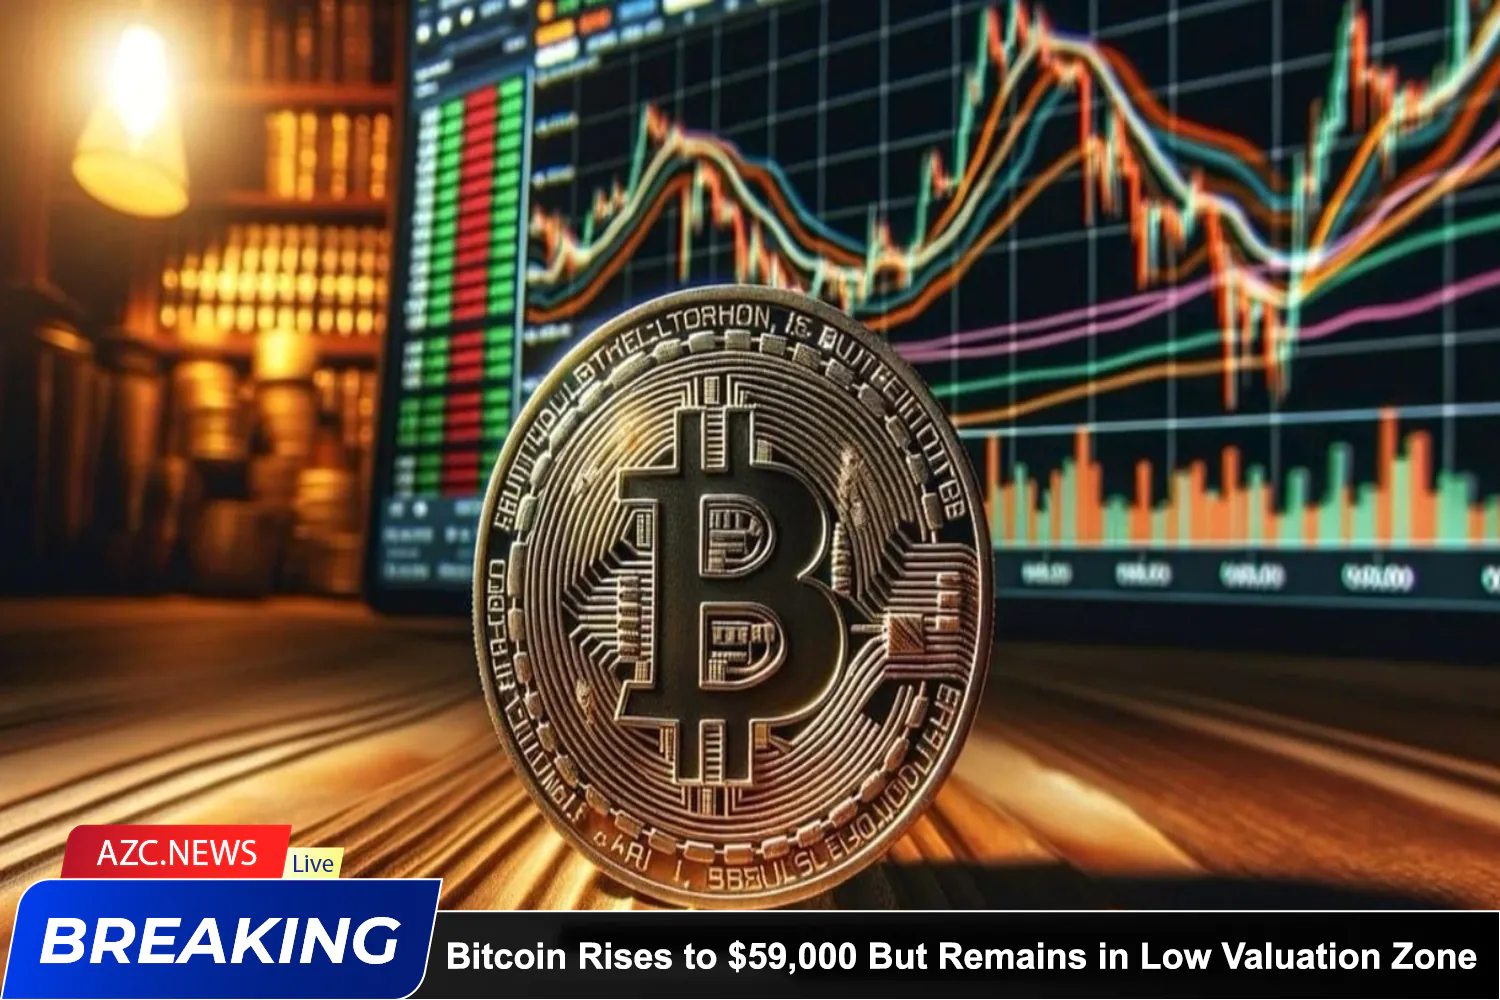 Azcnews Bitcoin Rises To $59,000 But Remains In Low Valuation Zone